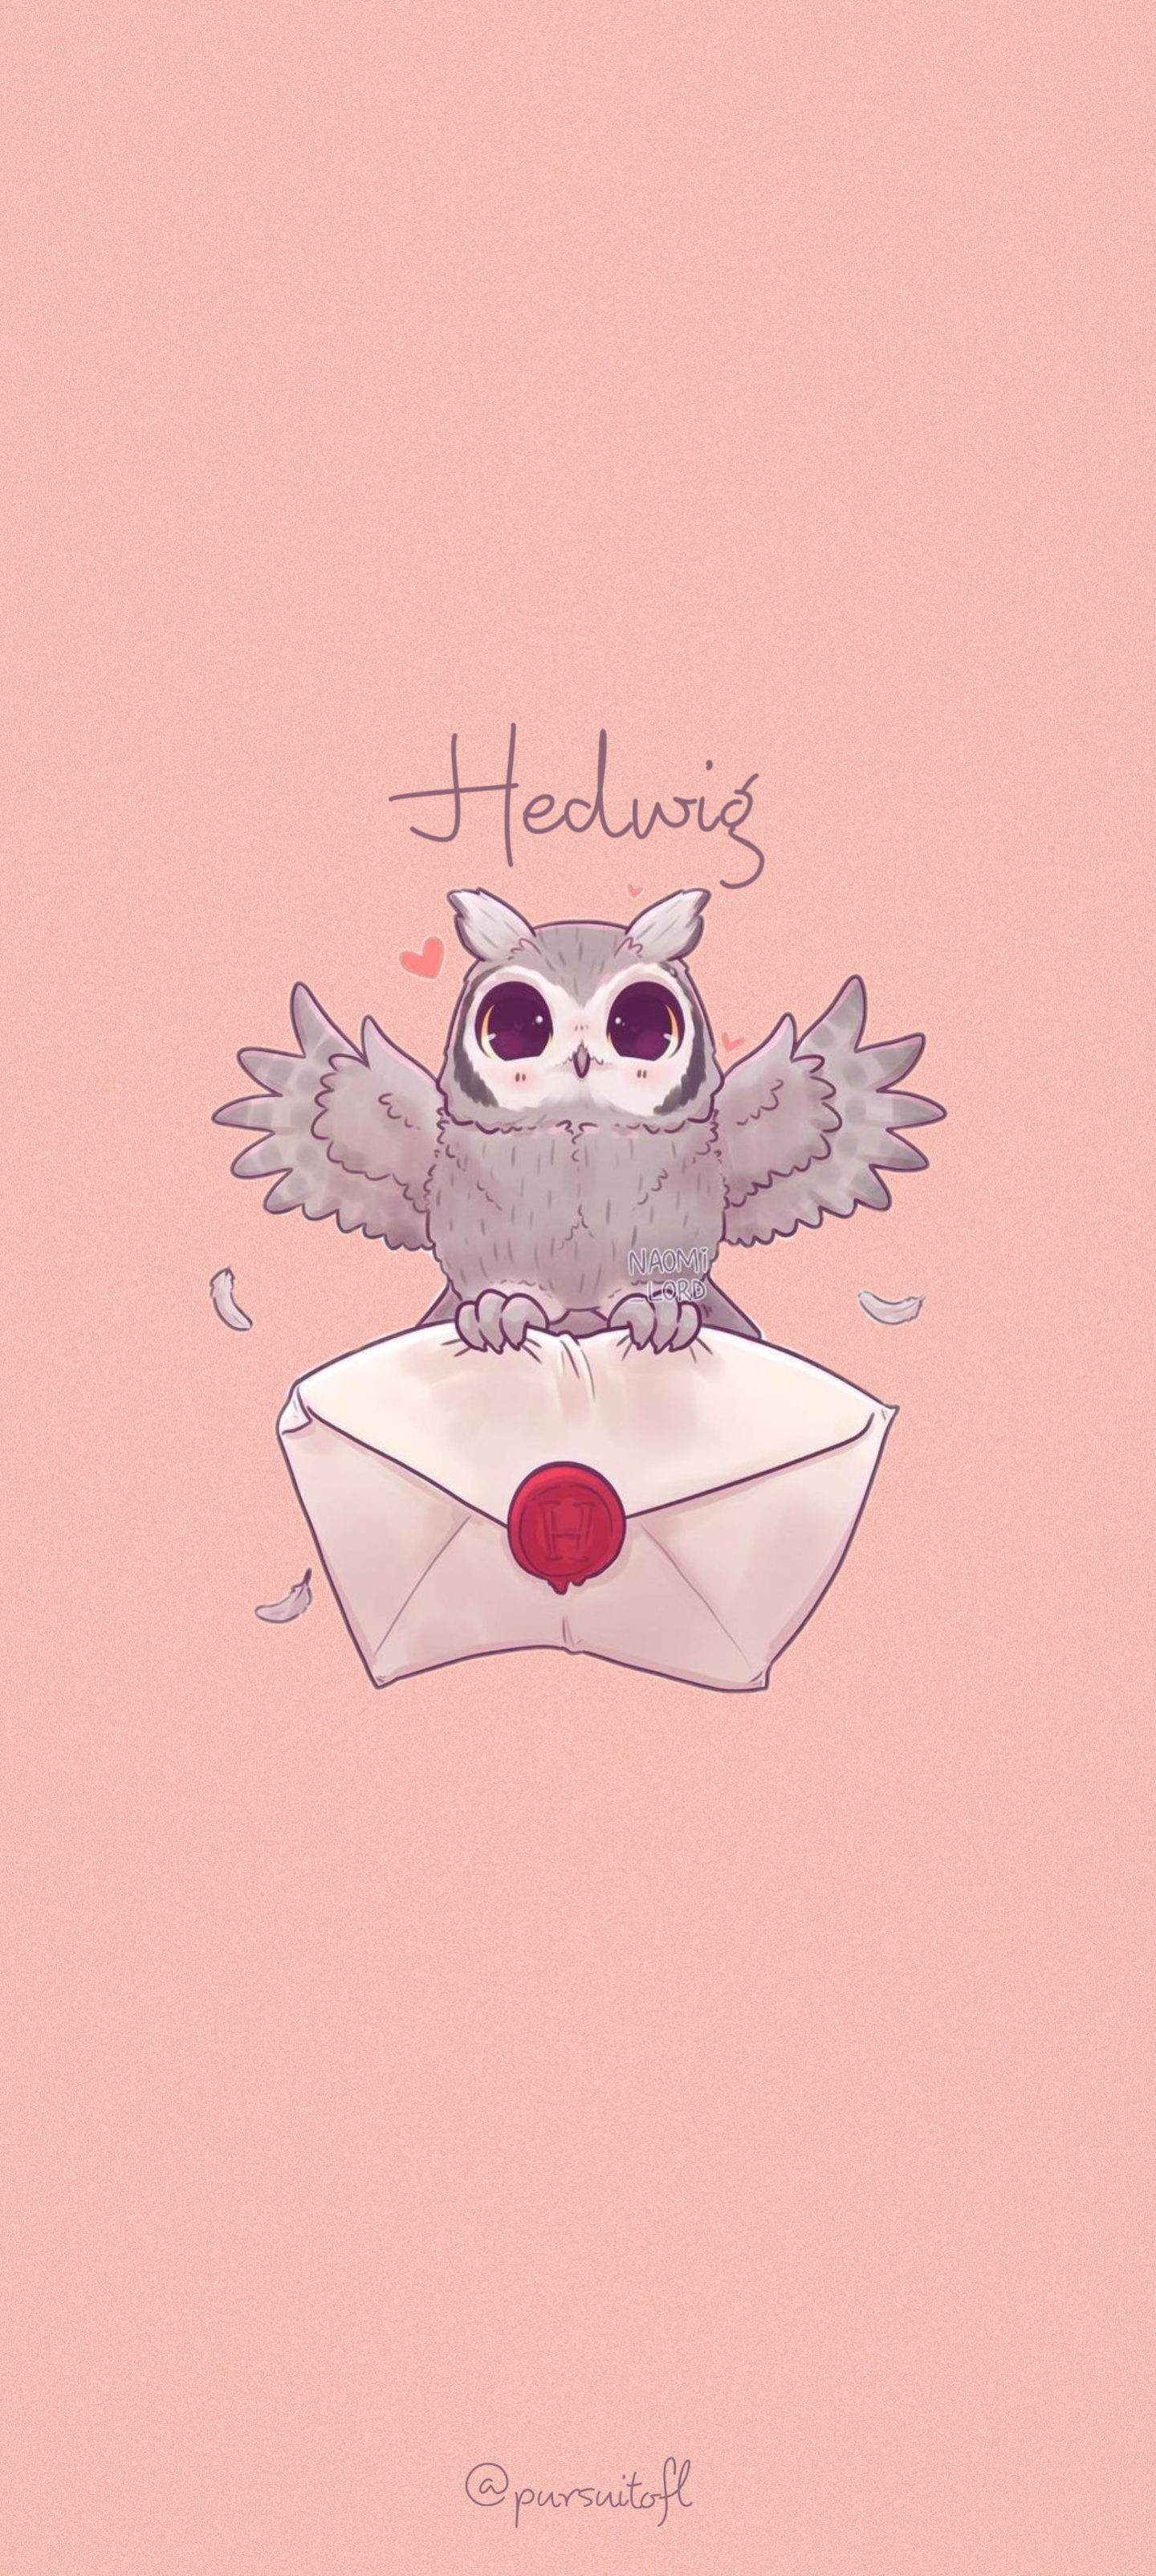 Pink phone wallpaper with Hedwig from Harry Potter holding a Hogwarts envelope and Hedwig text